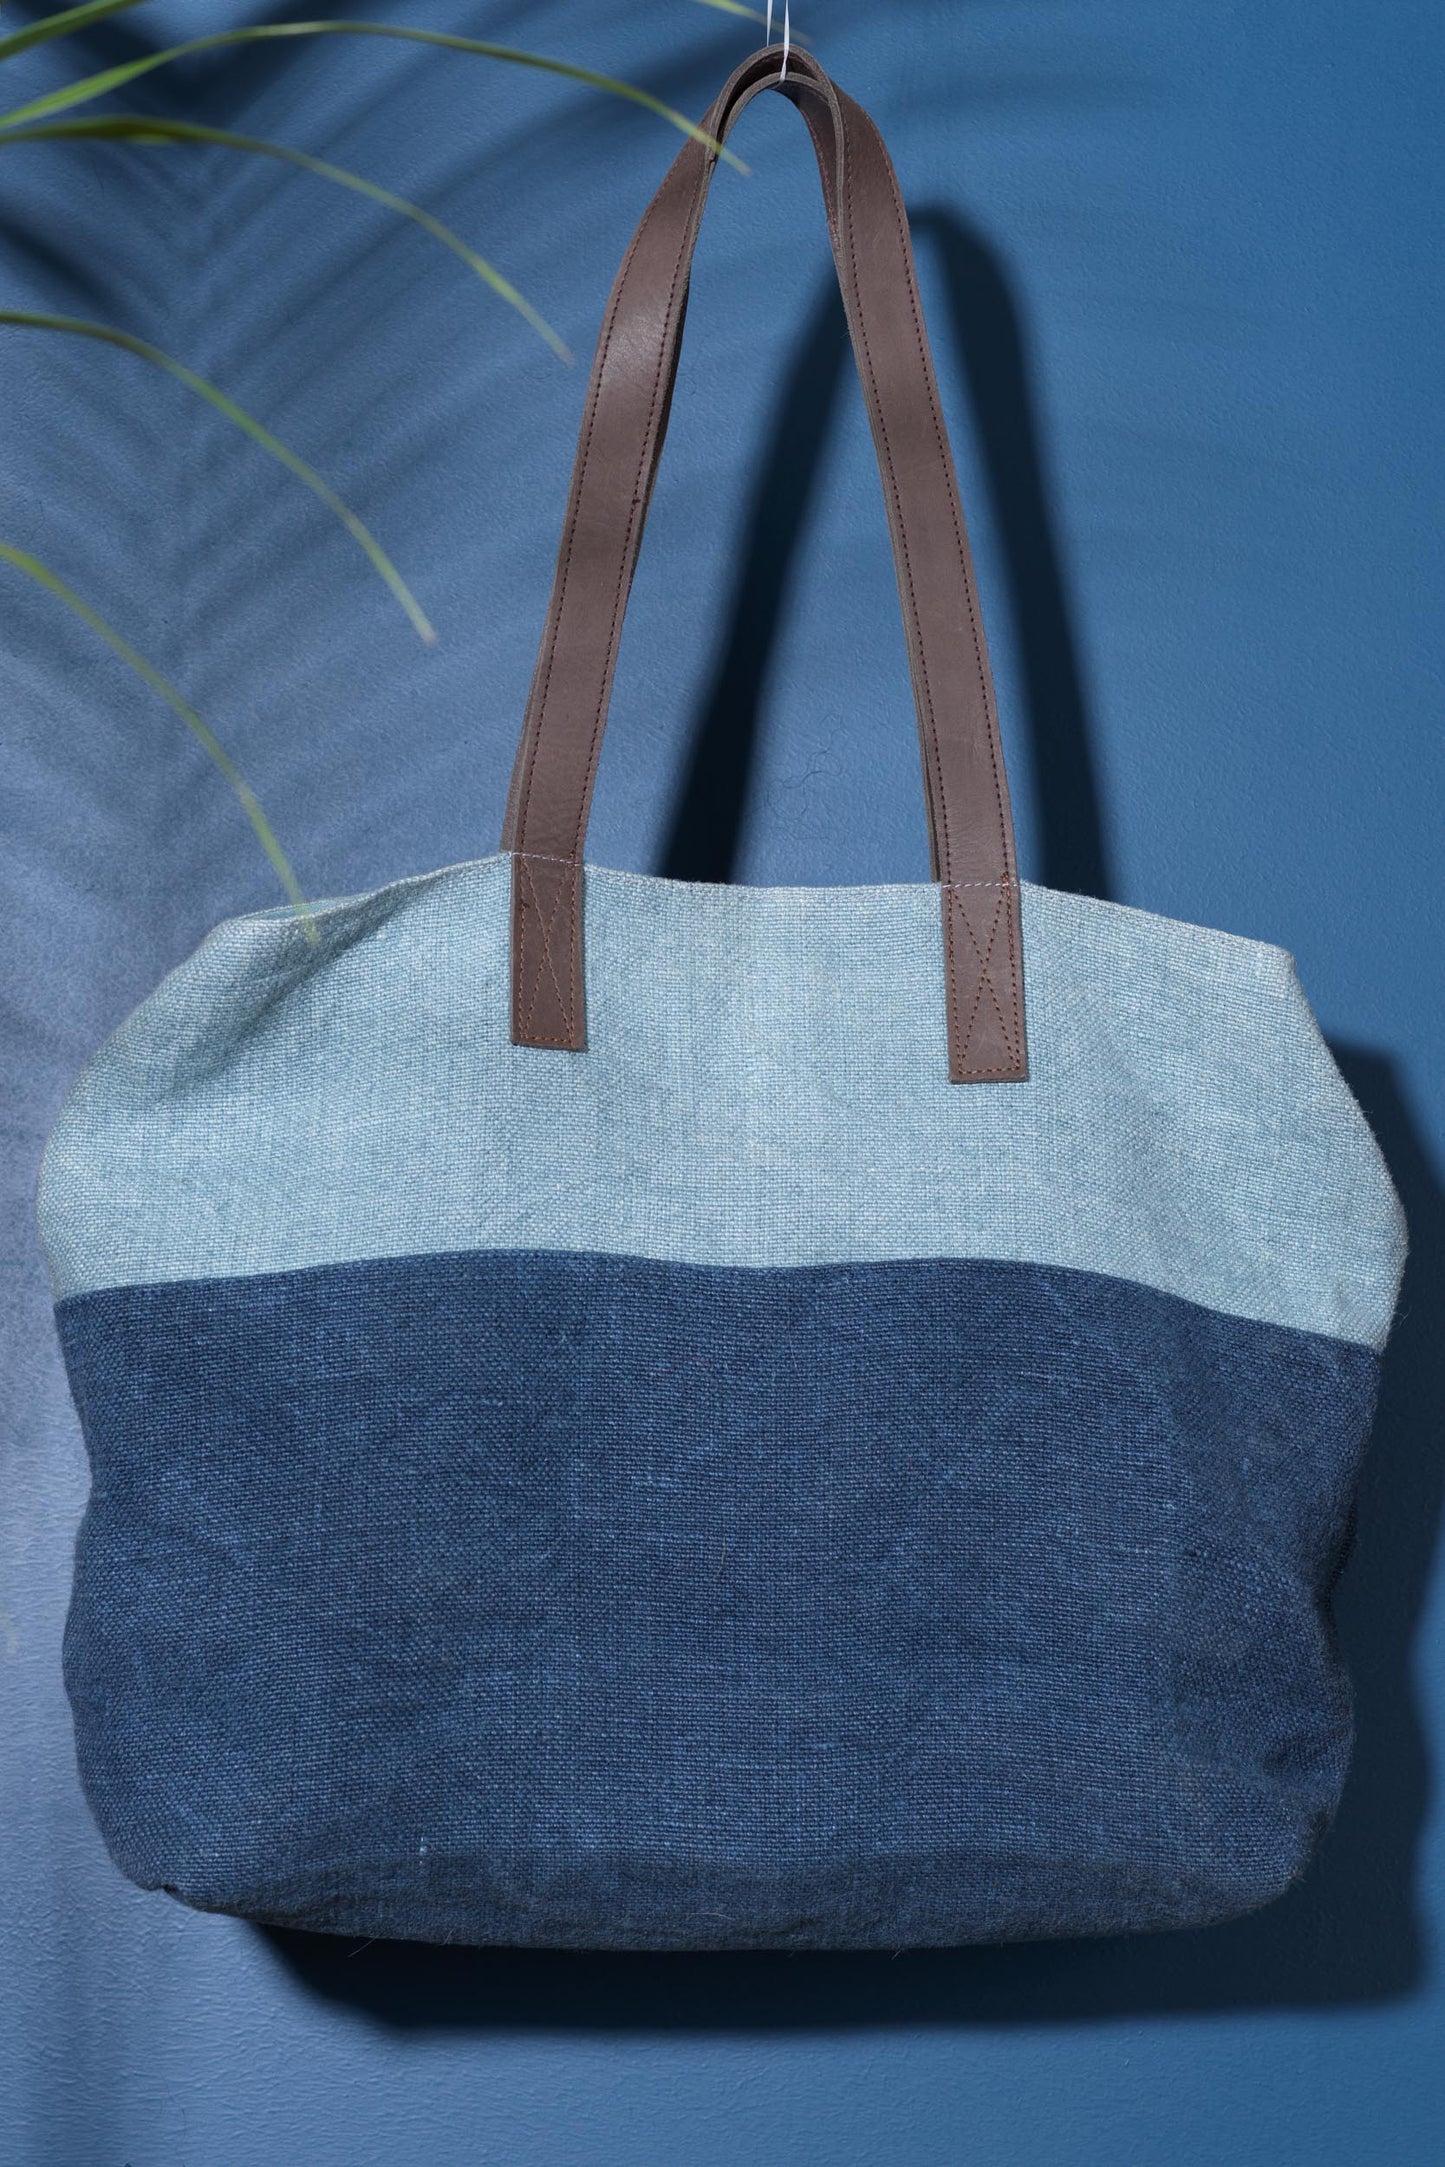 A large over the shoulder bag. With warm deep brown leather straps, and a two toned denim body. A light blue denim thick strip covers 1/4 of the bag and the rest is a classic deep blue denim. Against a blue background